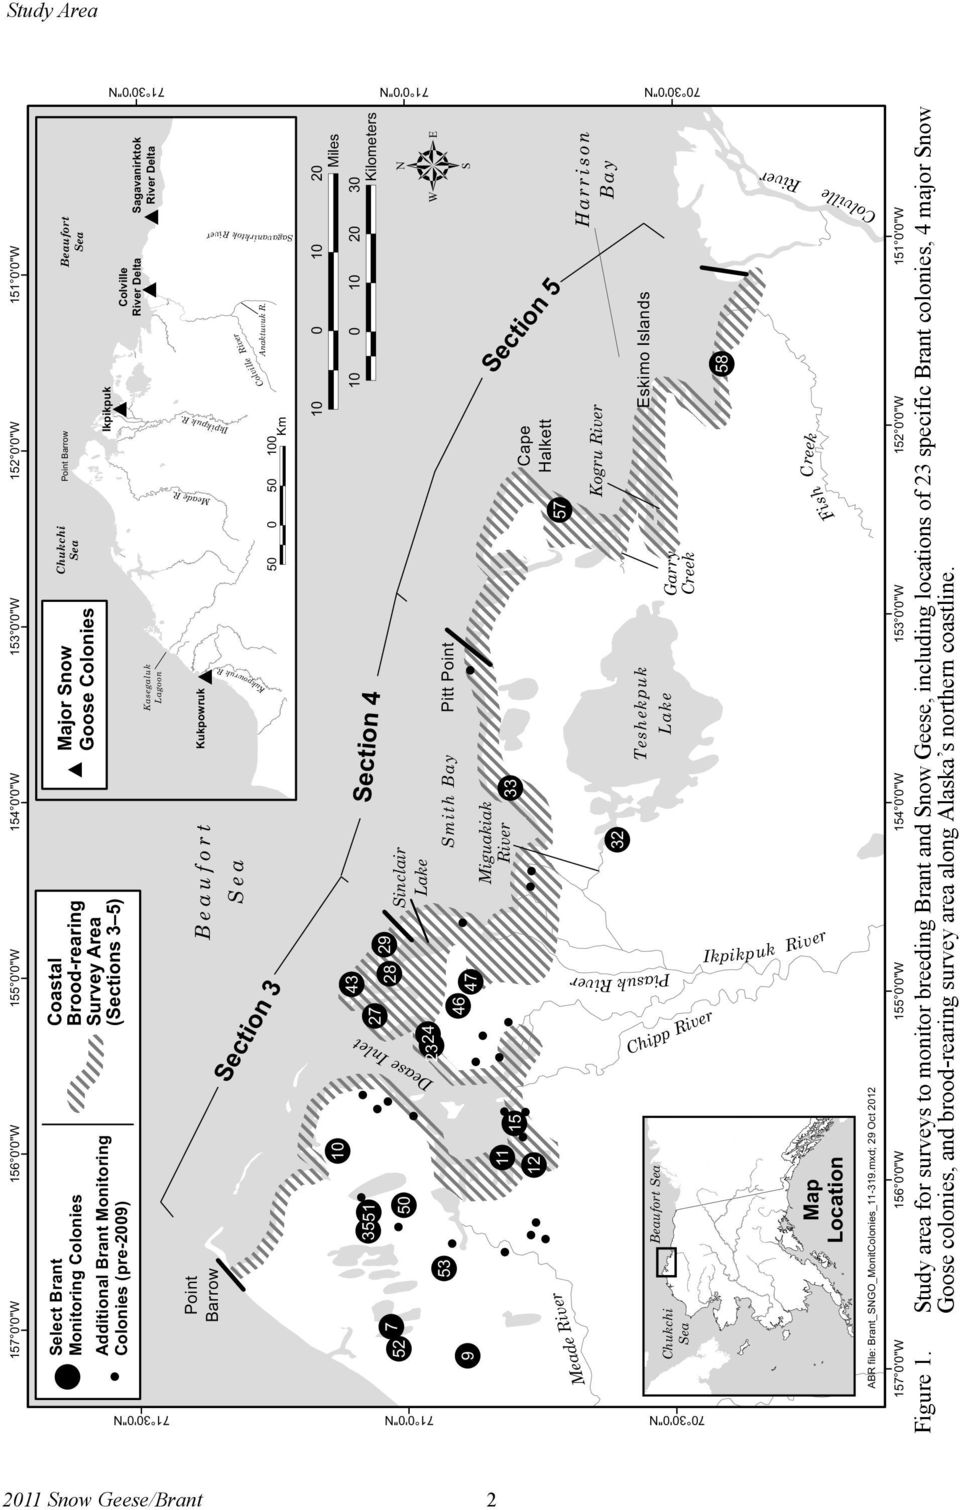 Study area for surveys to monitor breeding Brant and Snow Geese, including locations of 23 specific Brant colonies, 4 major Snow Goose colonies, and brood-rearing survey area along Alaska s northern